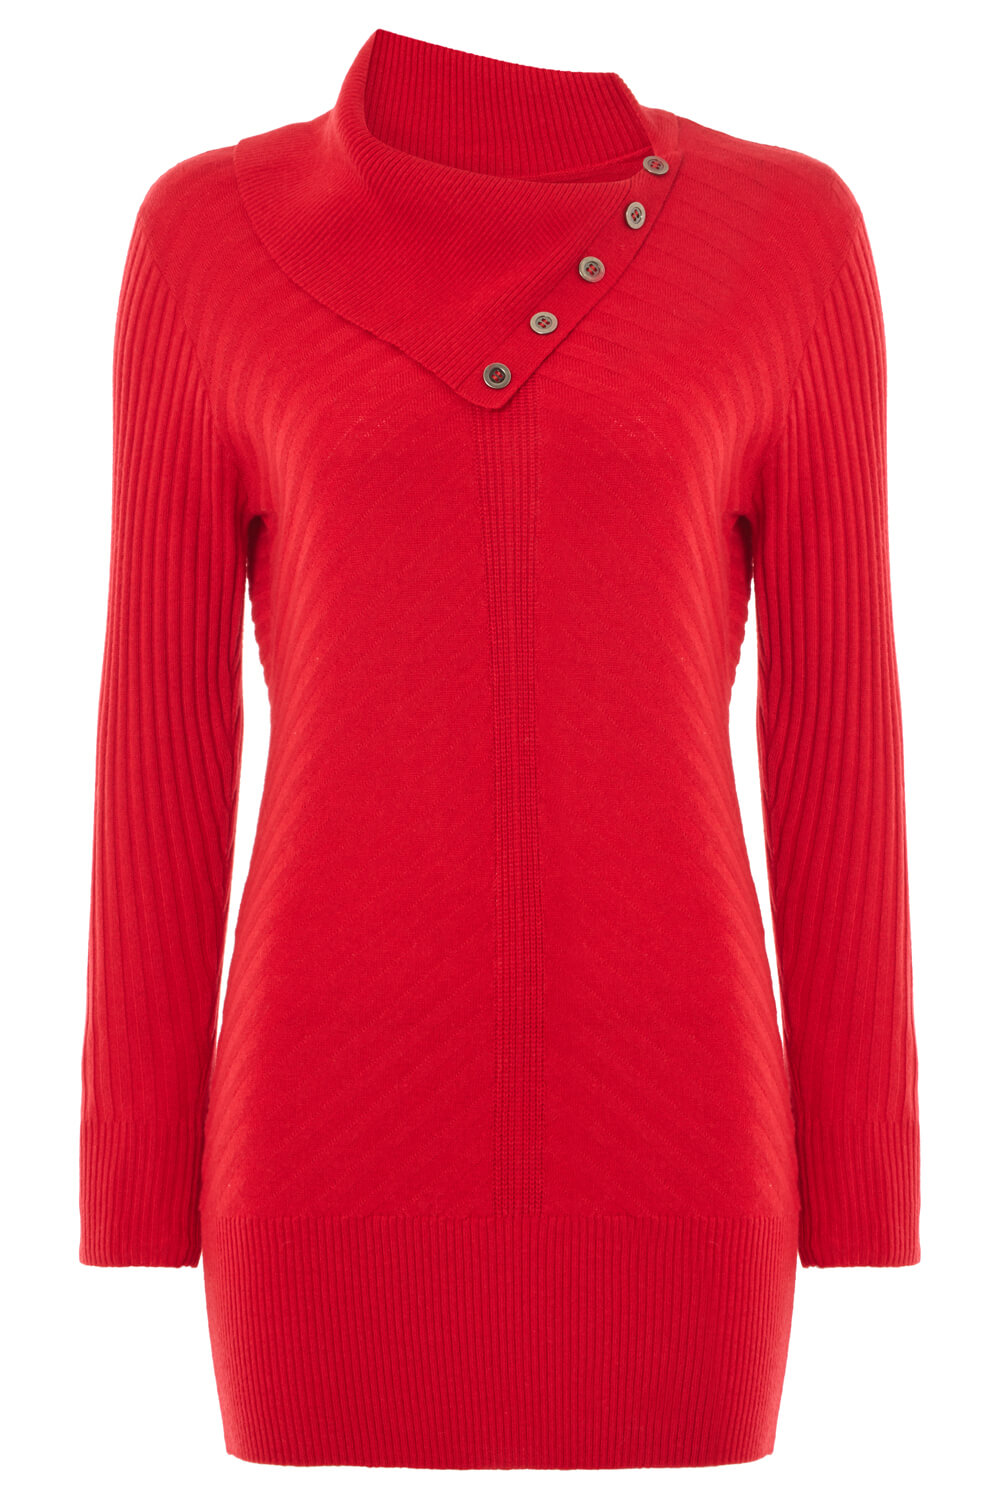 Red Split Button Neck Chevron Ribbed Tunic, Image 5 of 5